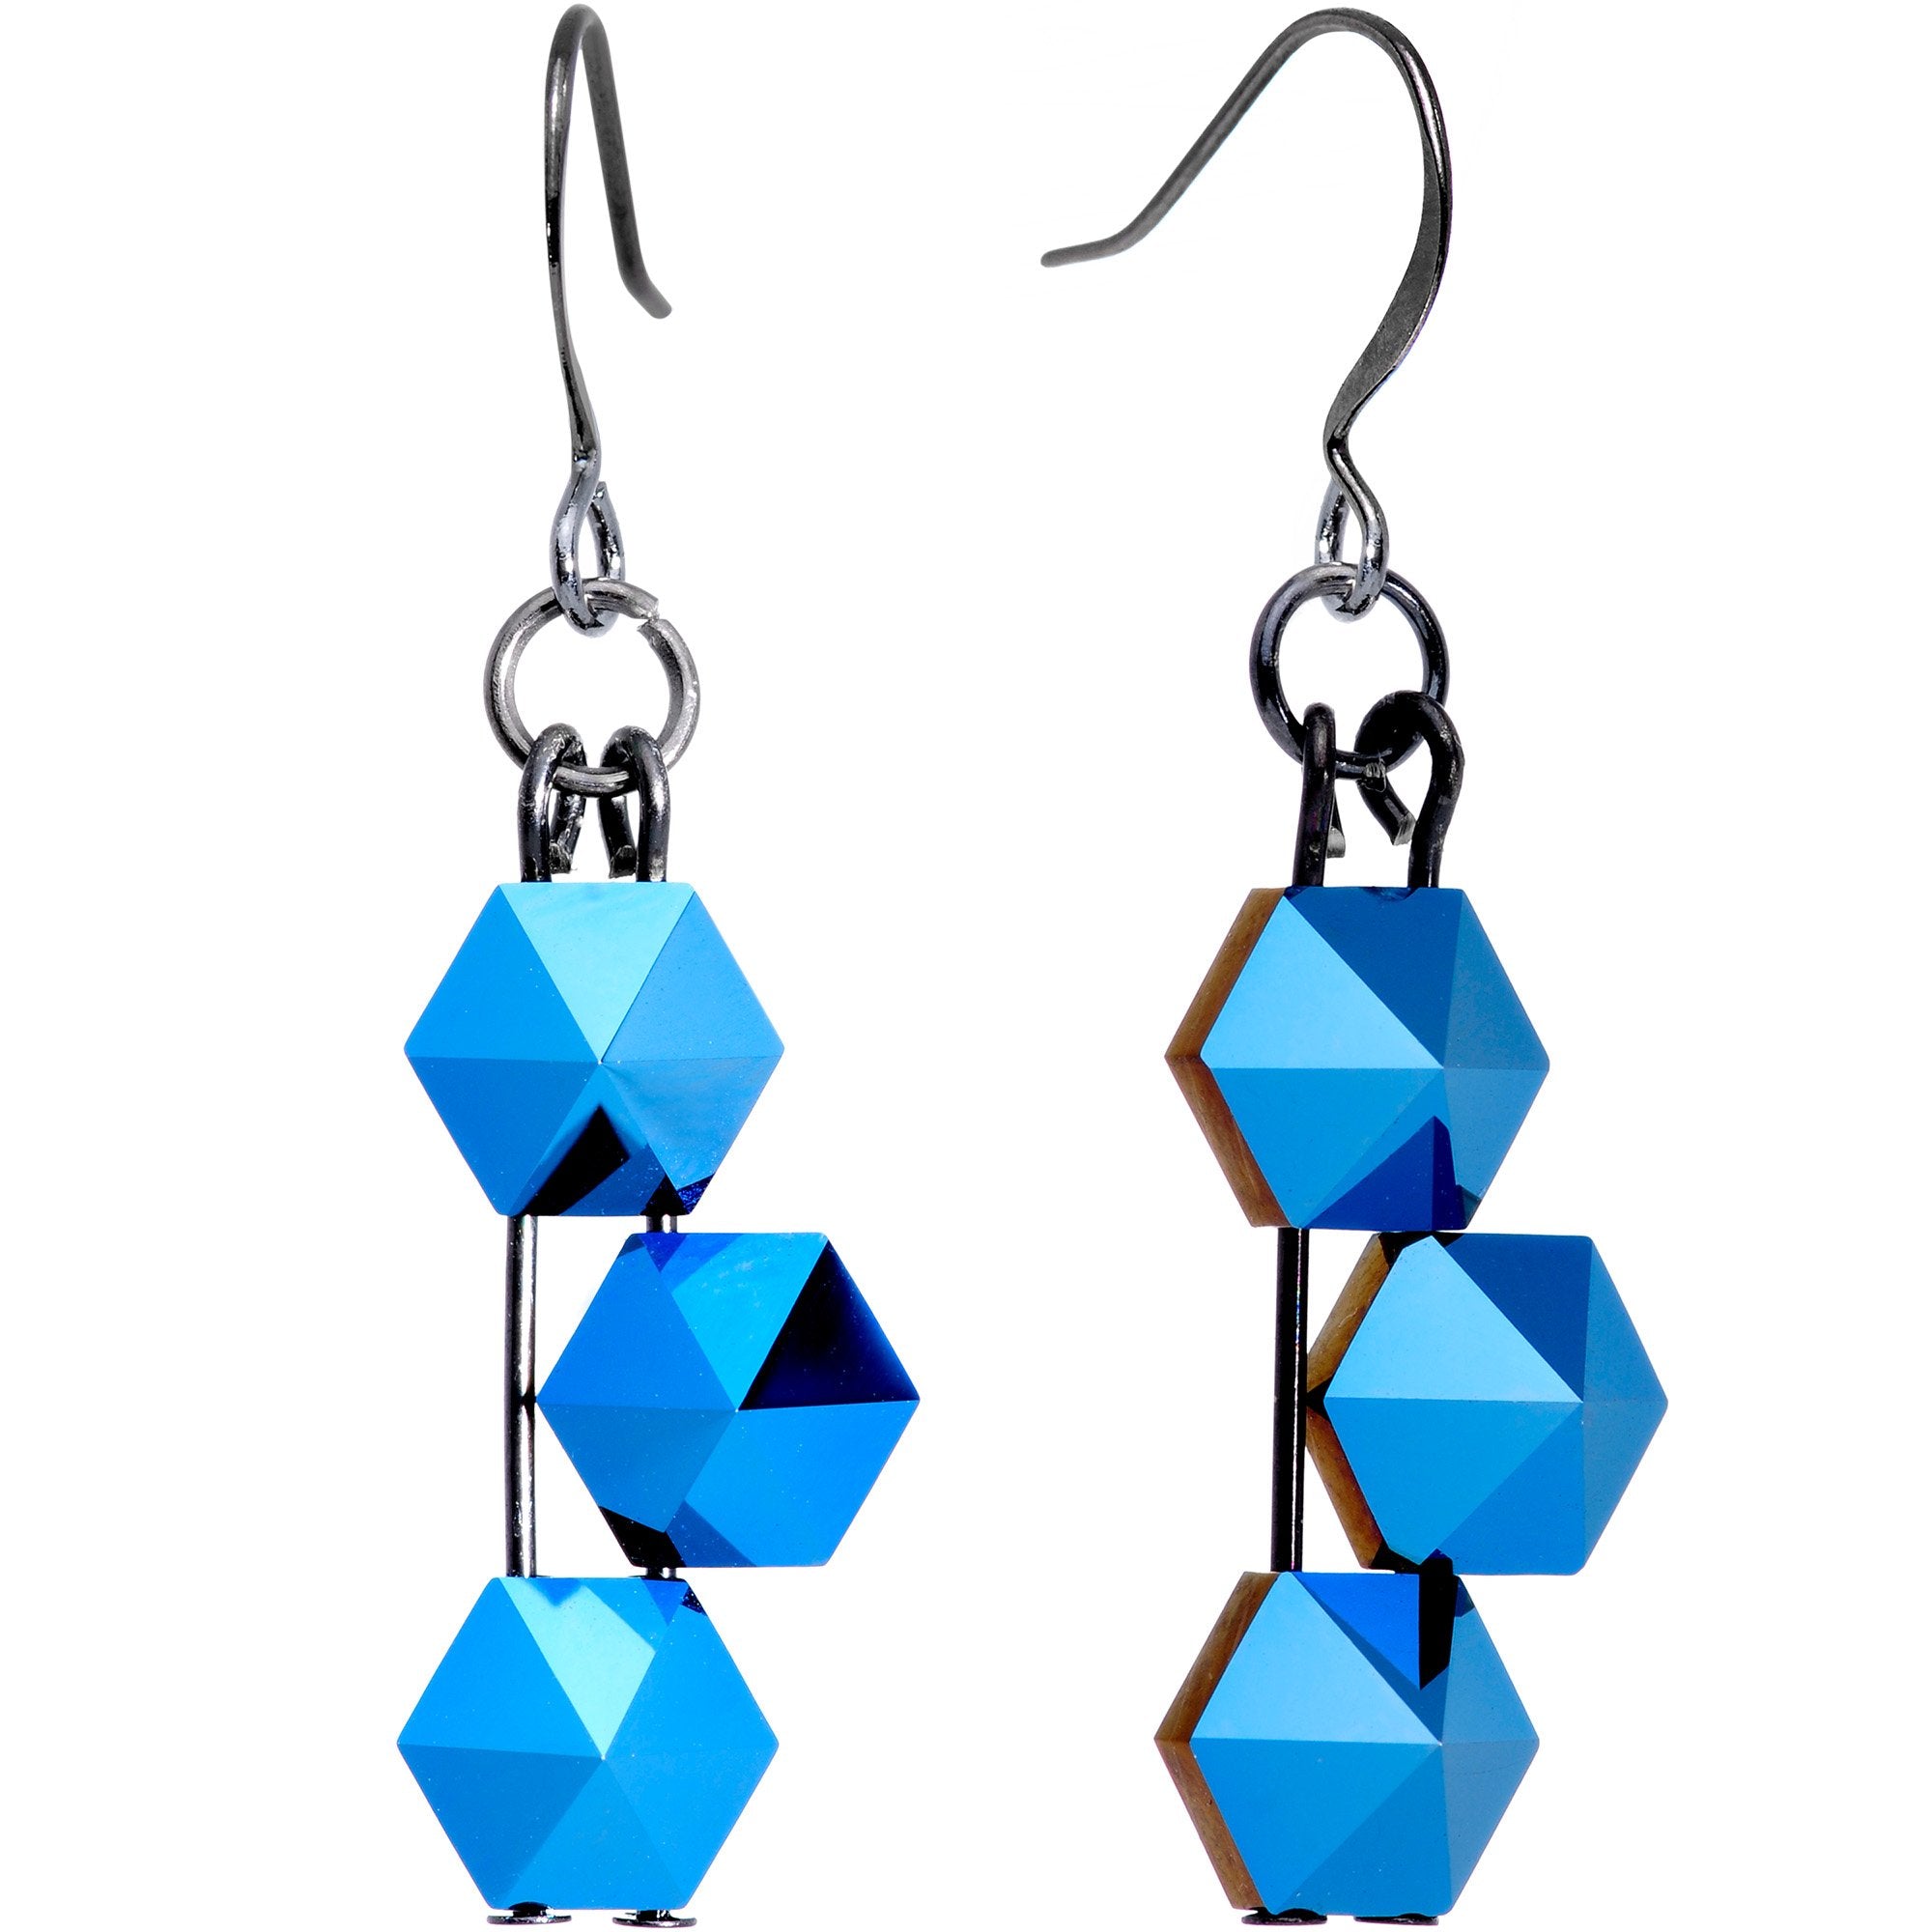 Blue Tri Pyramid Fishhook Earrings Created with Crystals